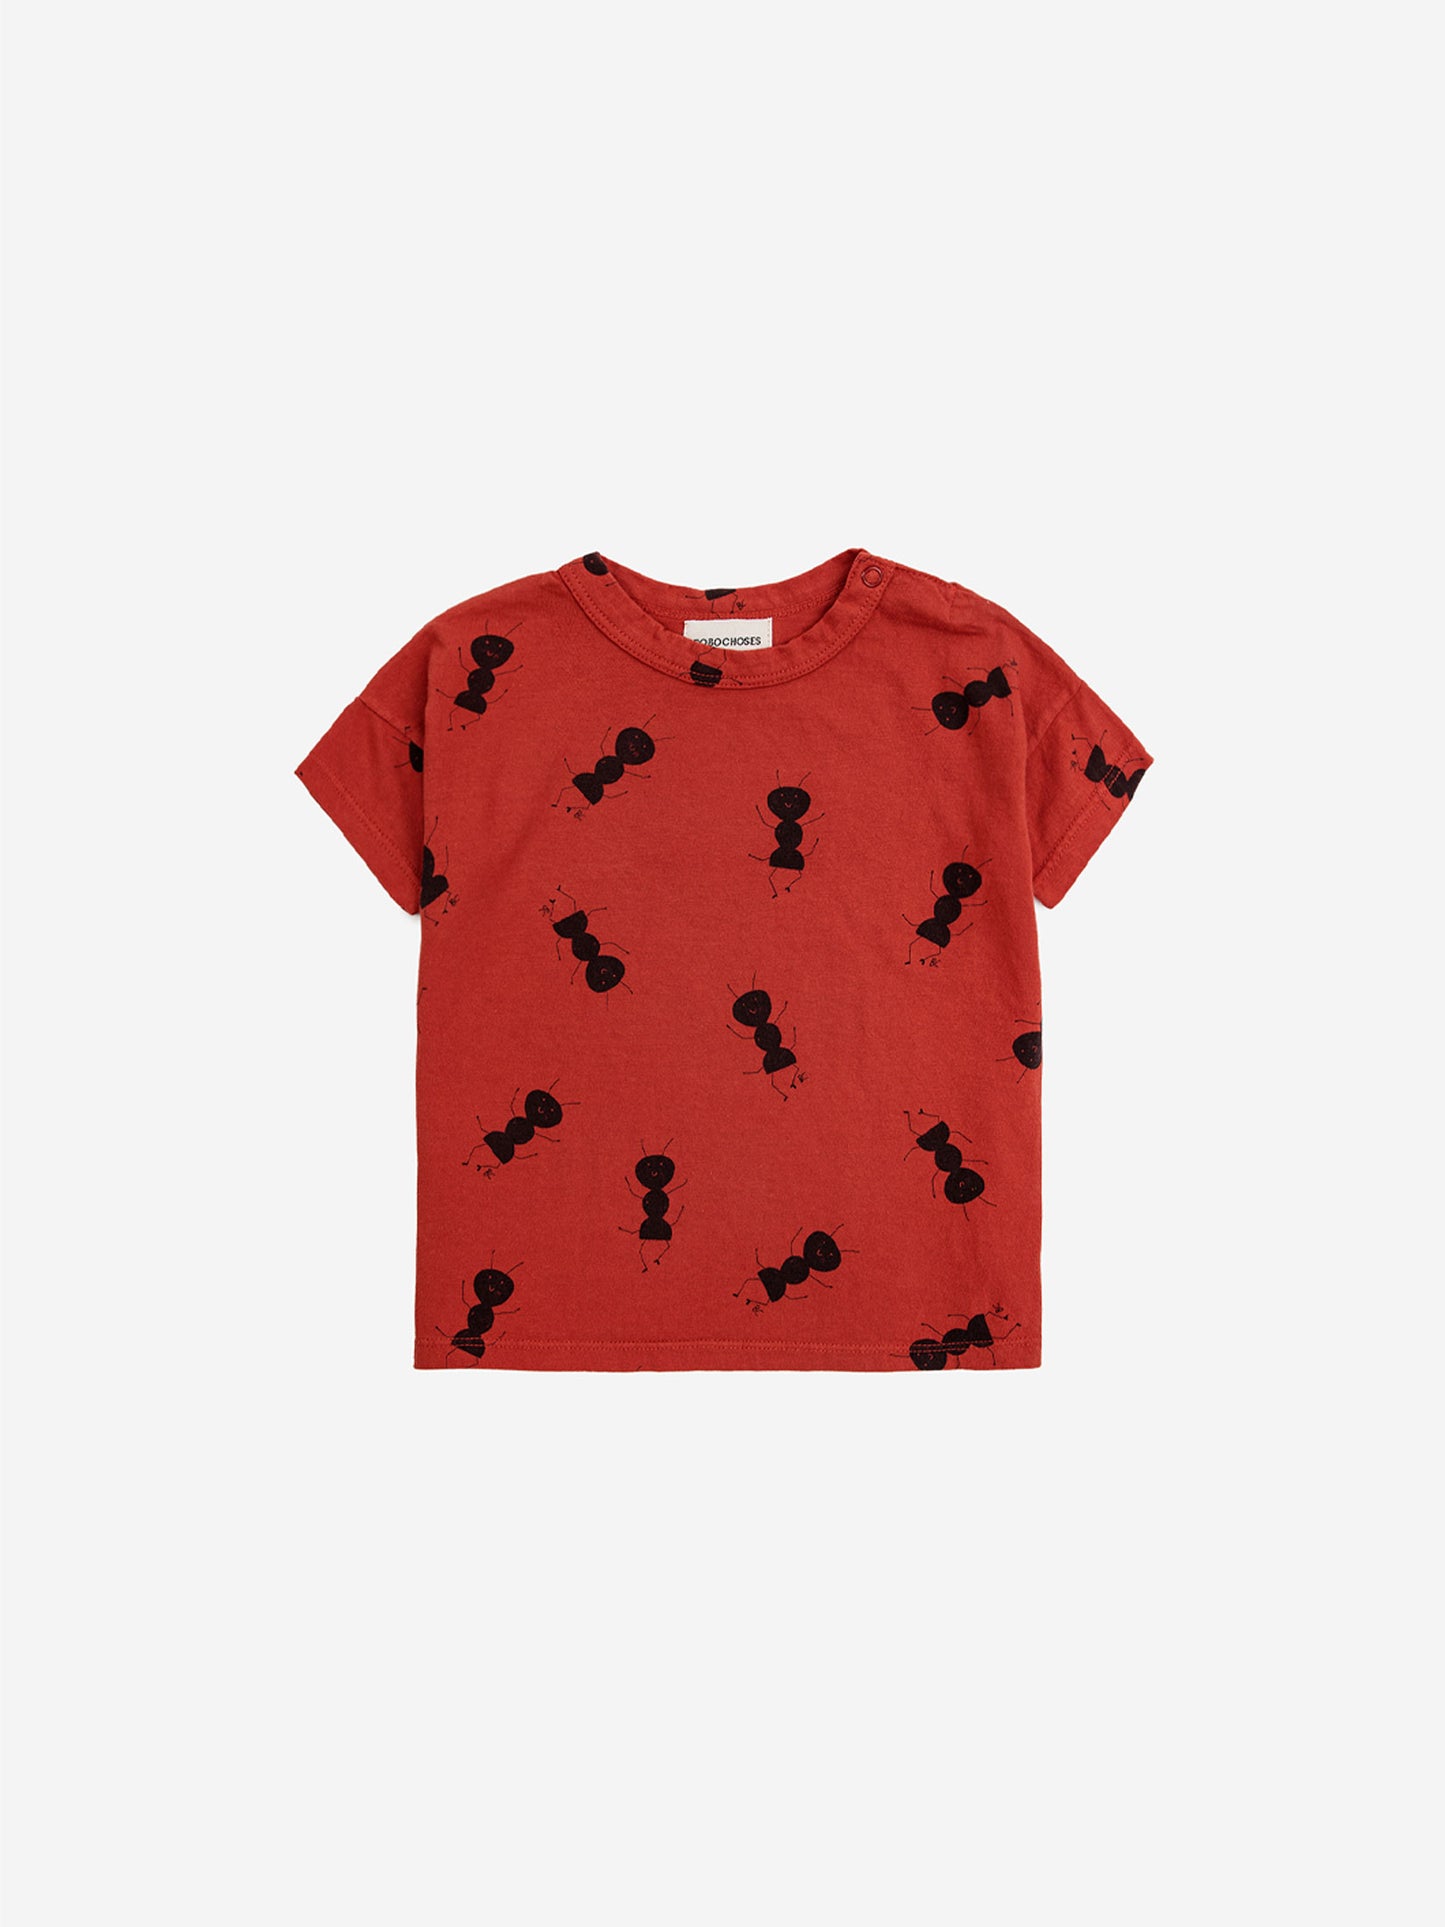 Ant all over t-shirt